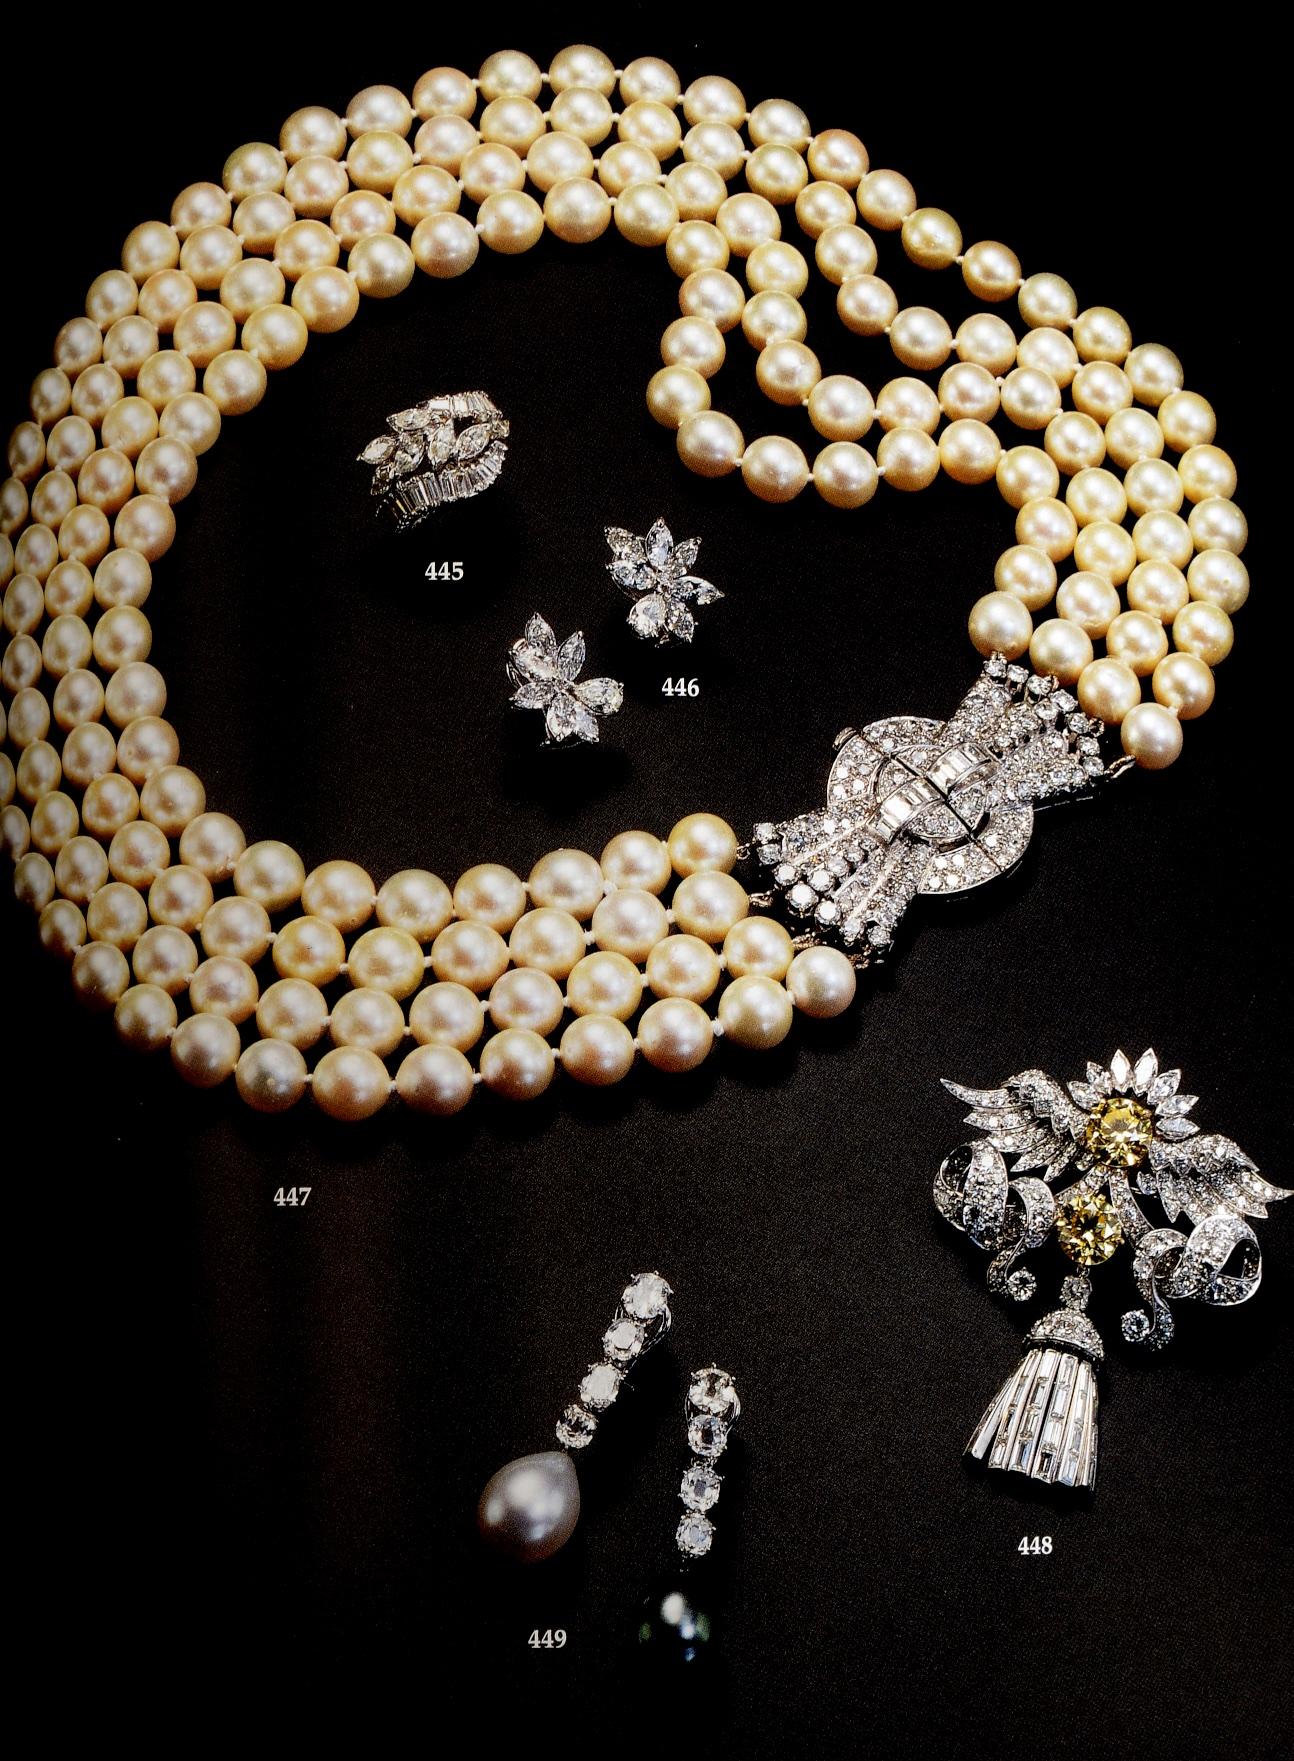 Fine Jewels and Watches. Sotheby's Sale 7312, Los Angeles, May 4, 1999. Sotheby's, LA, 1999. First Edition soft cover. 208pp, 495 lots photographed in color, with results. Includes the Hutton Family Collection.
 